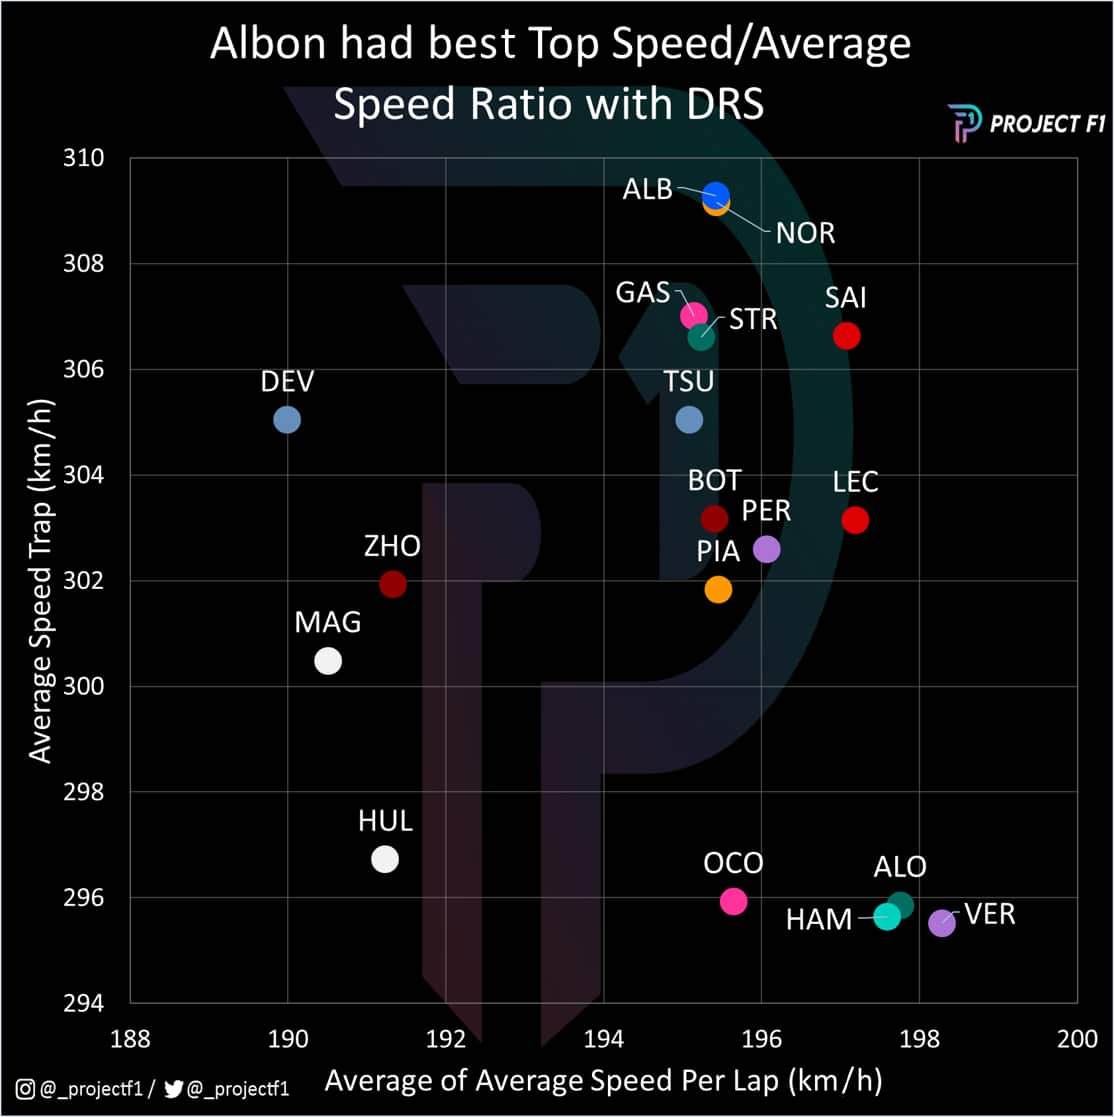 Canadian GP top speed and average speed ratio